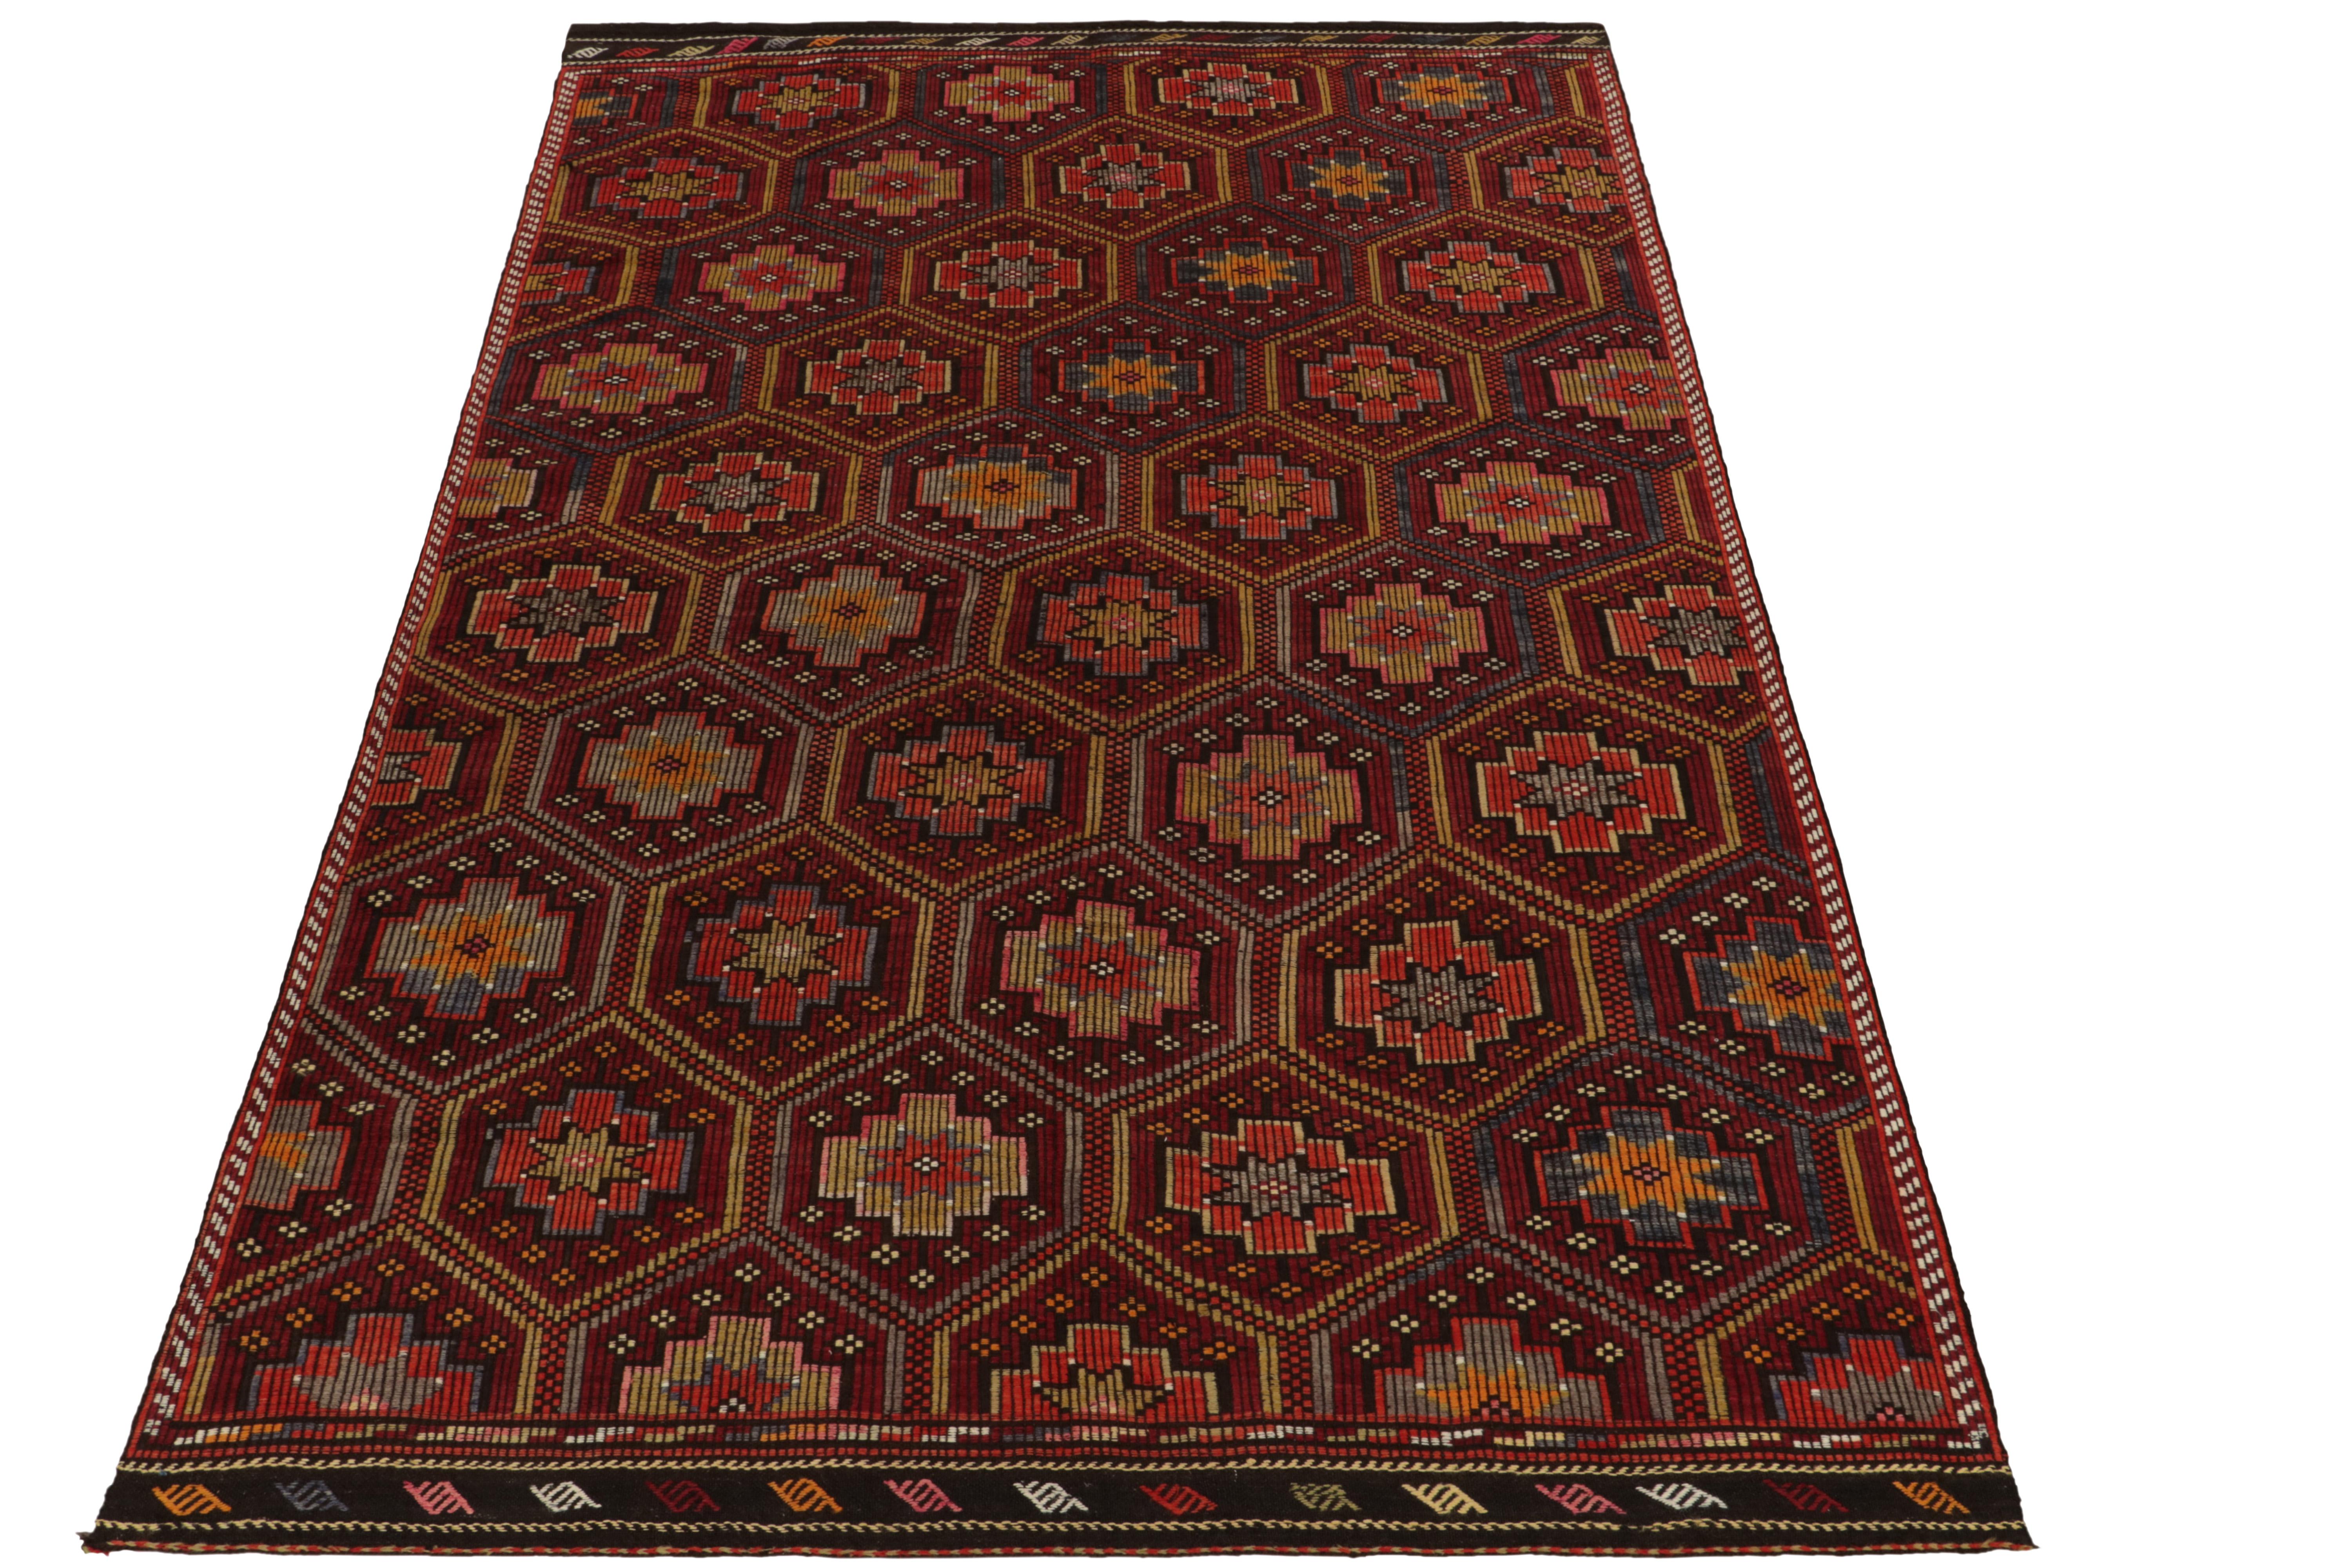 Carrying rich Kurdish inspiration, a mid-century Cecim kilim rug entering our flat weave collection. This 6x10 rug of Anatolian attitudes revels in impeccable embroidery & detailing in design. Reading on the tribal sensibilities of the 1950s, the